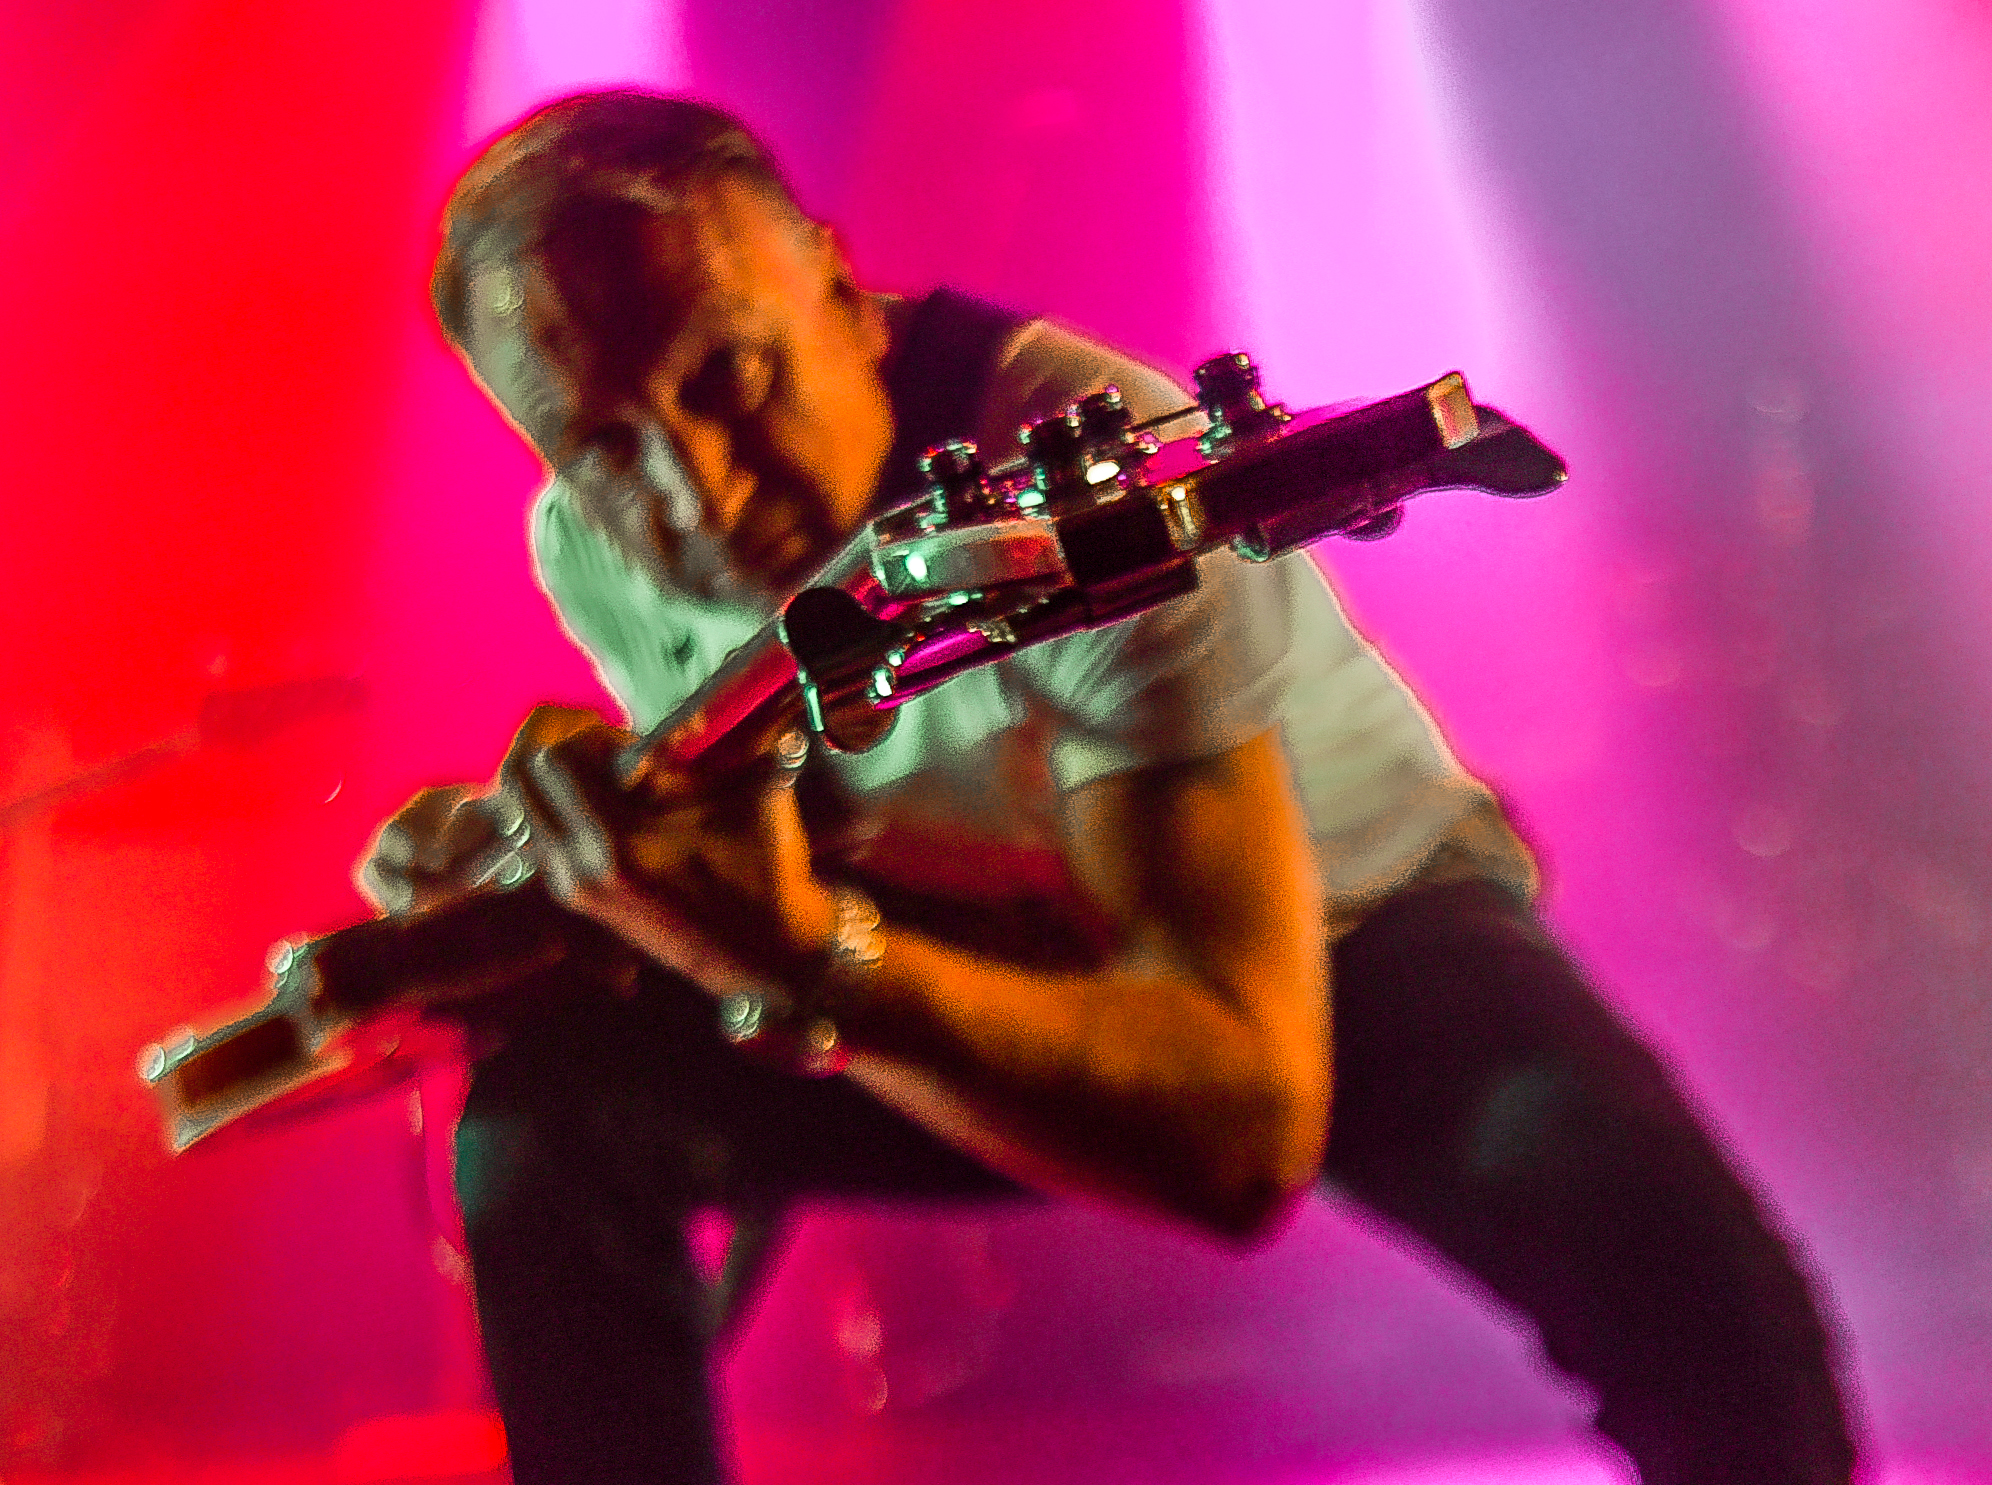 Peter Hook & The Light Amaze At The Metro With New Order And Joy Division Sets